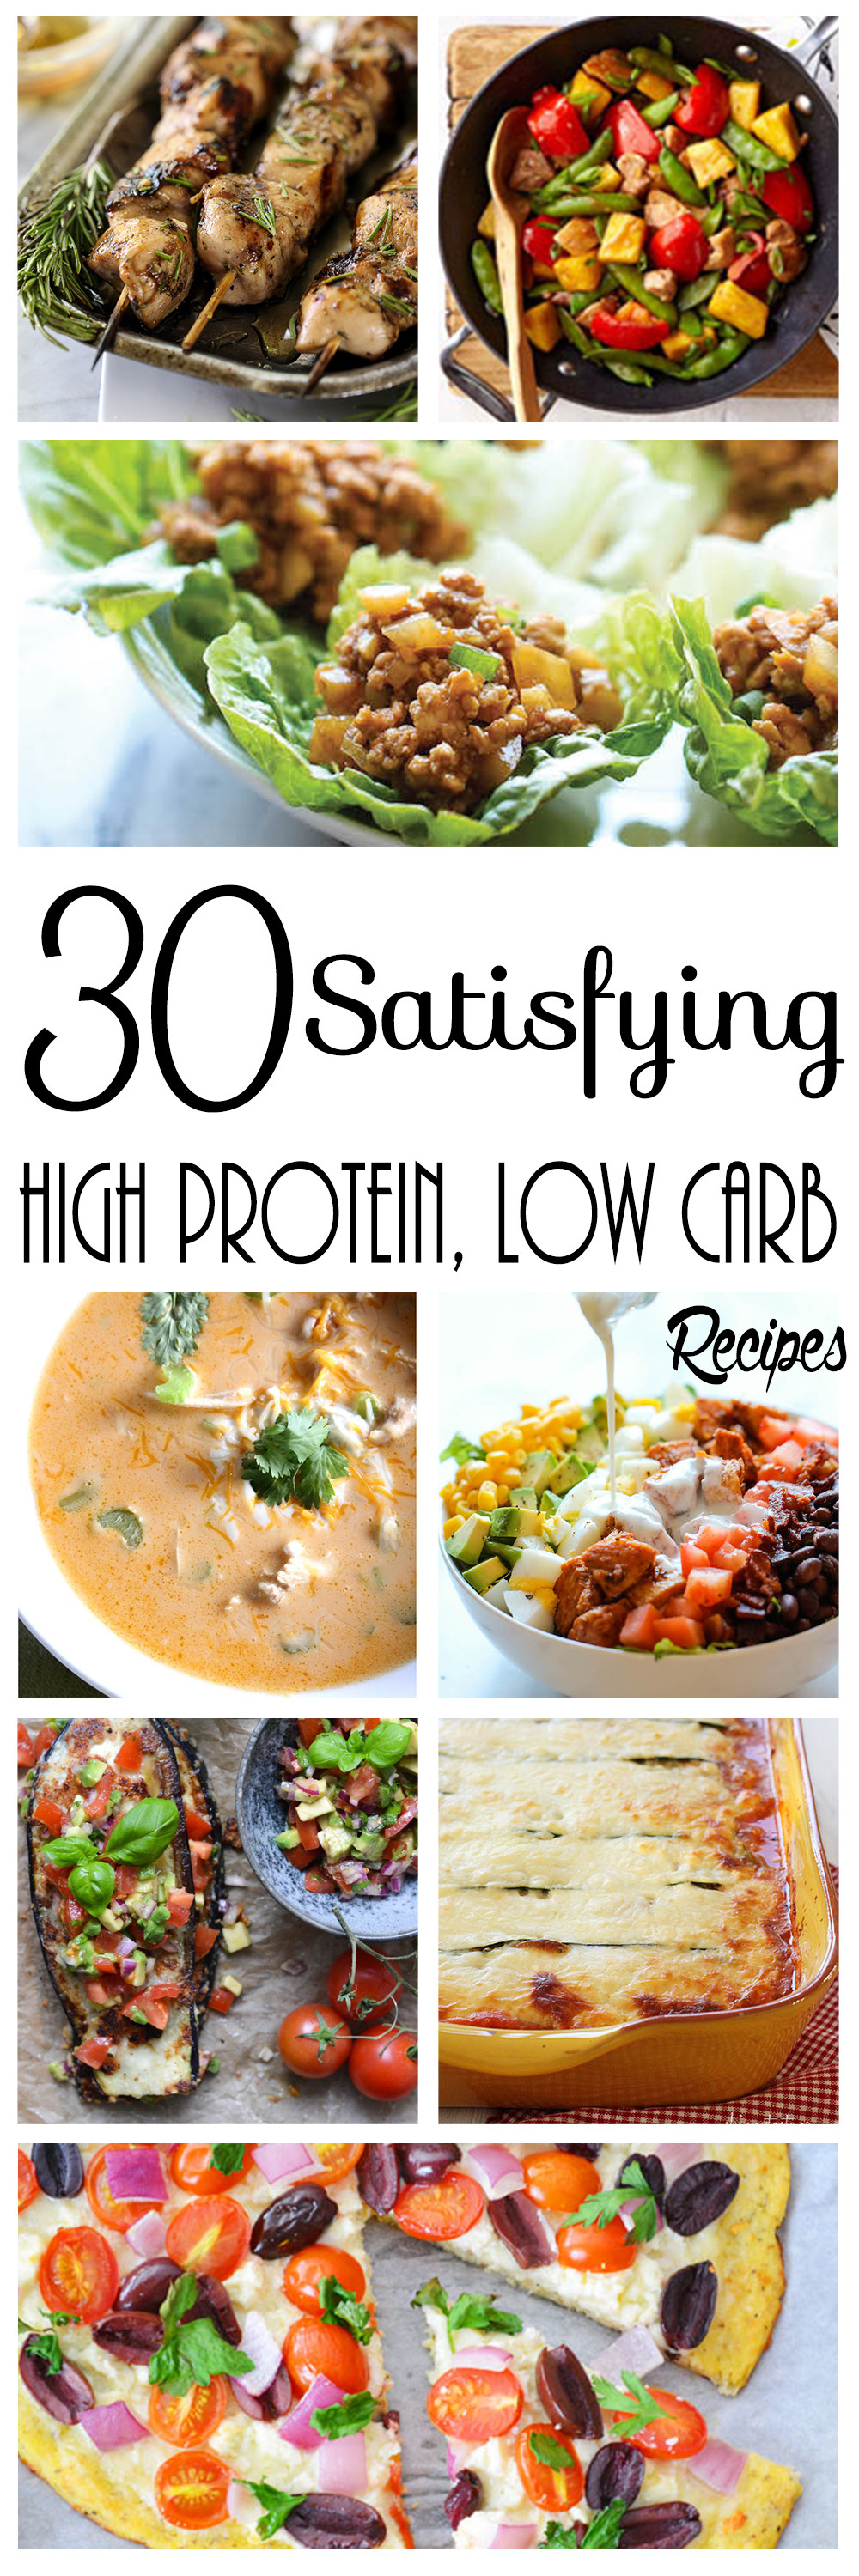 High Protein Low Carb Diet Recipes
 30 Satisfying High Protein Low Carb Recipes FULL